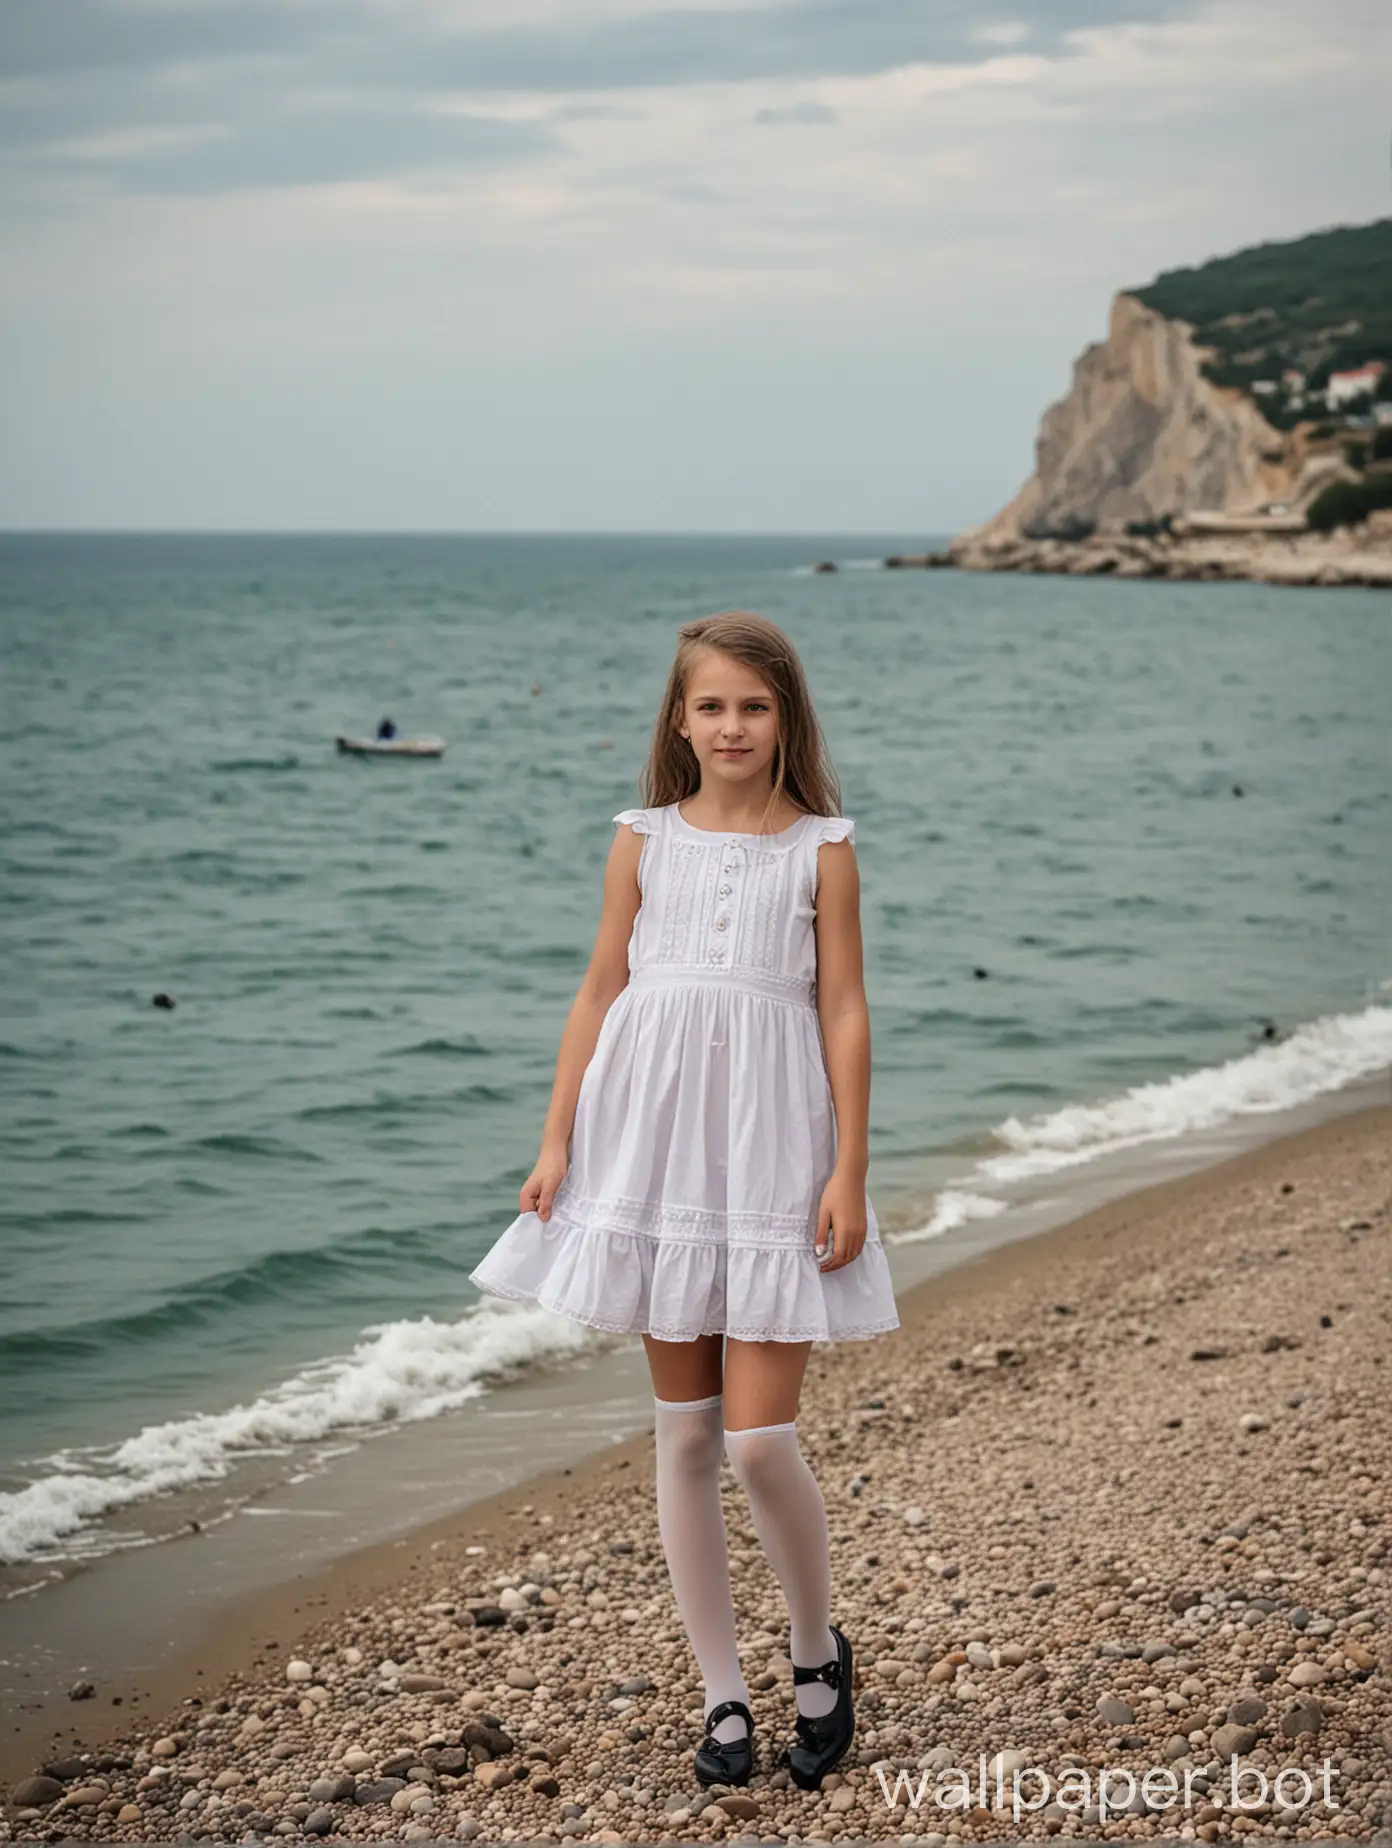 Crimea, sea view, 10-year-old girl in a short dress with stockings, full height